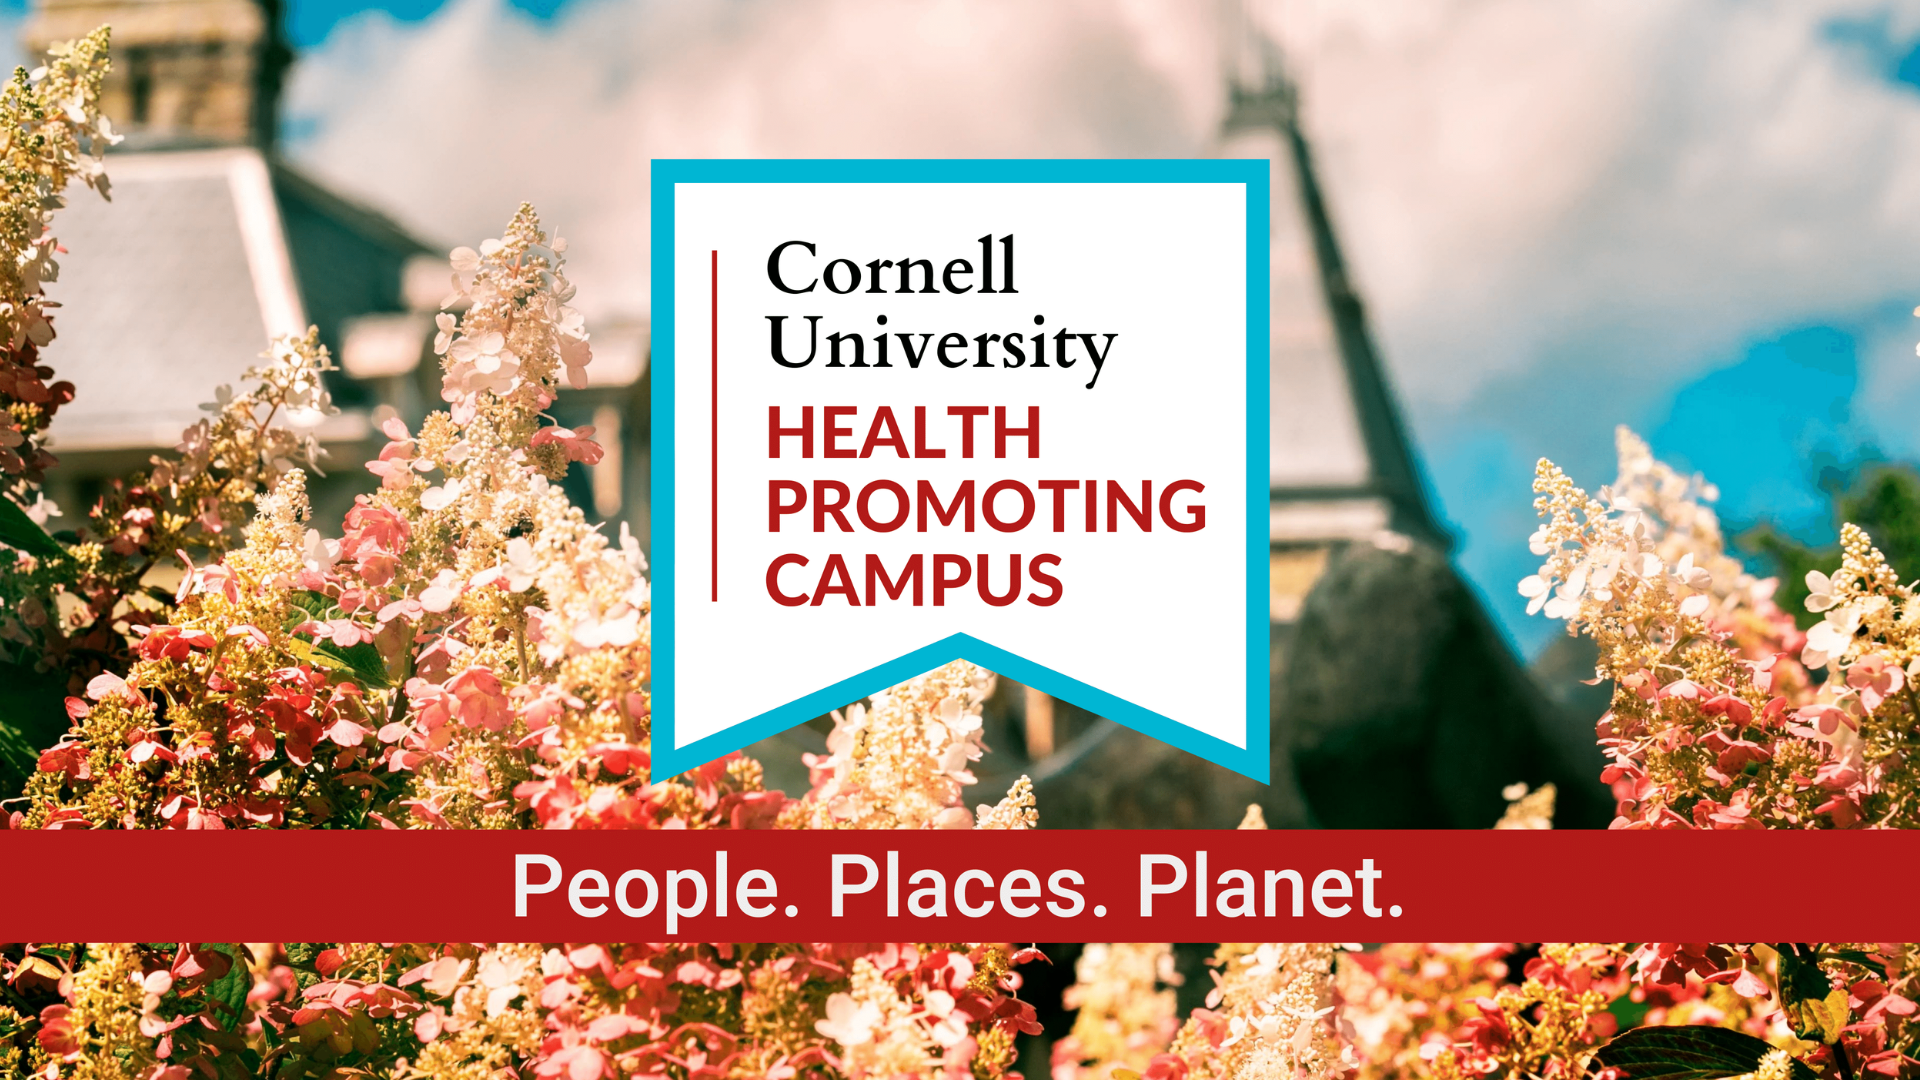 Okanagan Charter signing commits Cornell as Health Promoting Campus